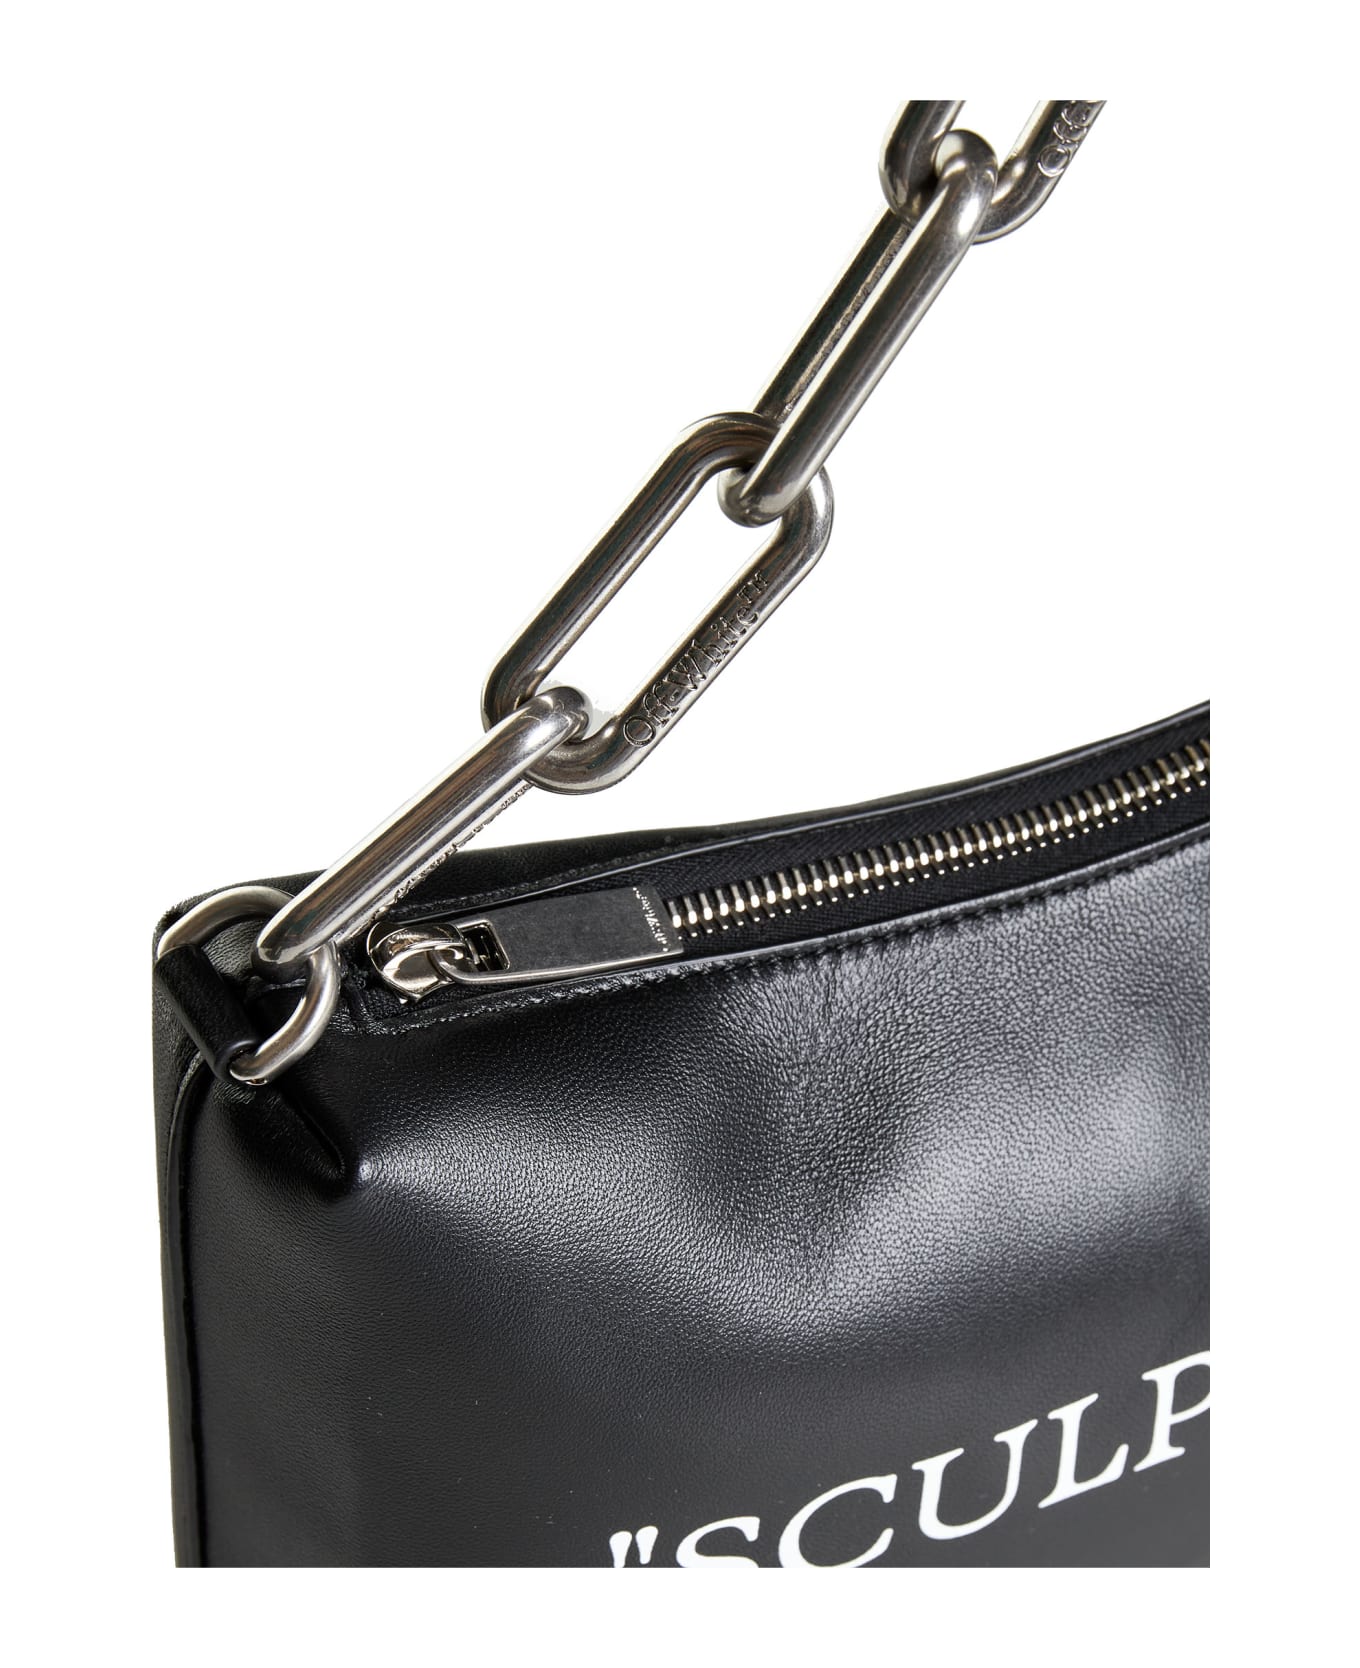 Off-White Block Pouch Quote - Black silver トートバッグ